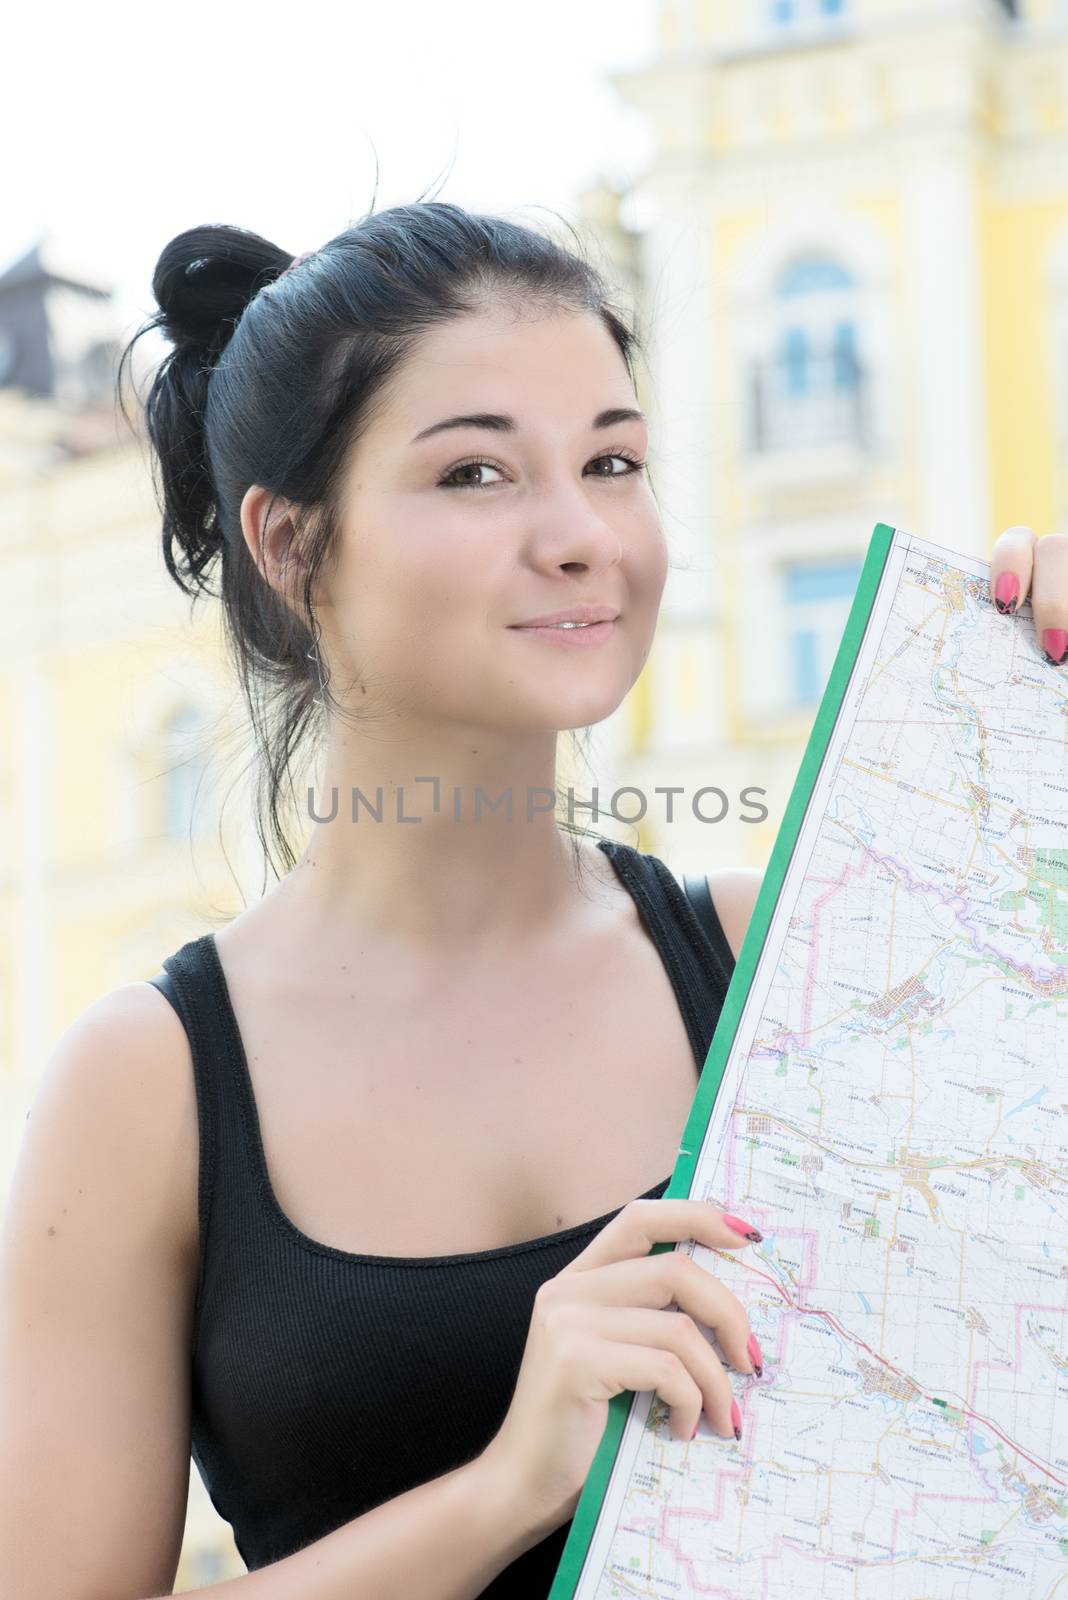 Smiling beautiful woman with map in hands